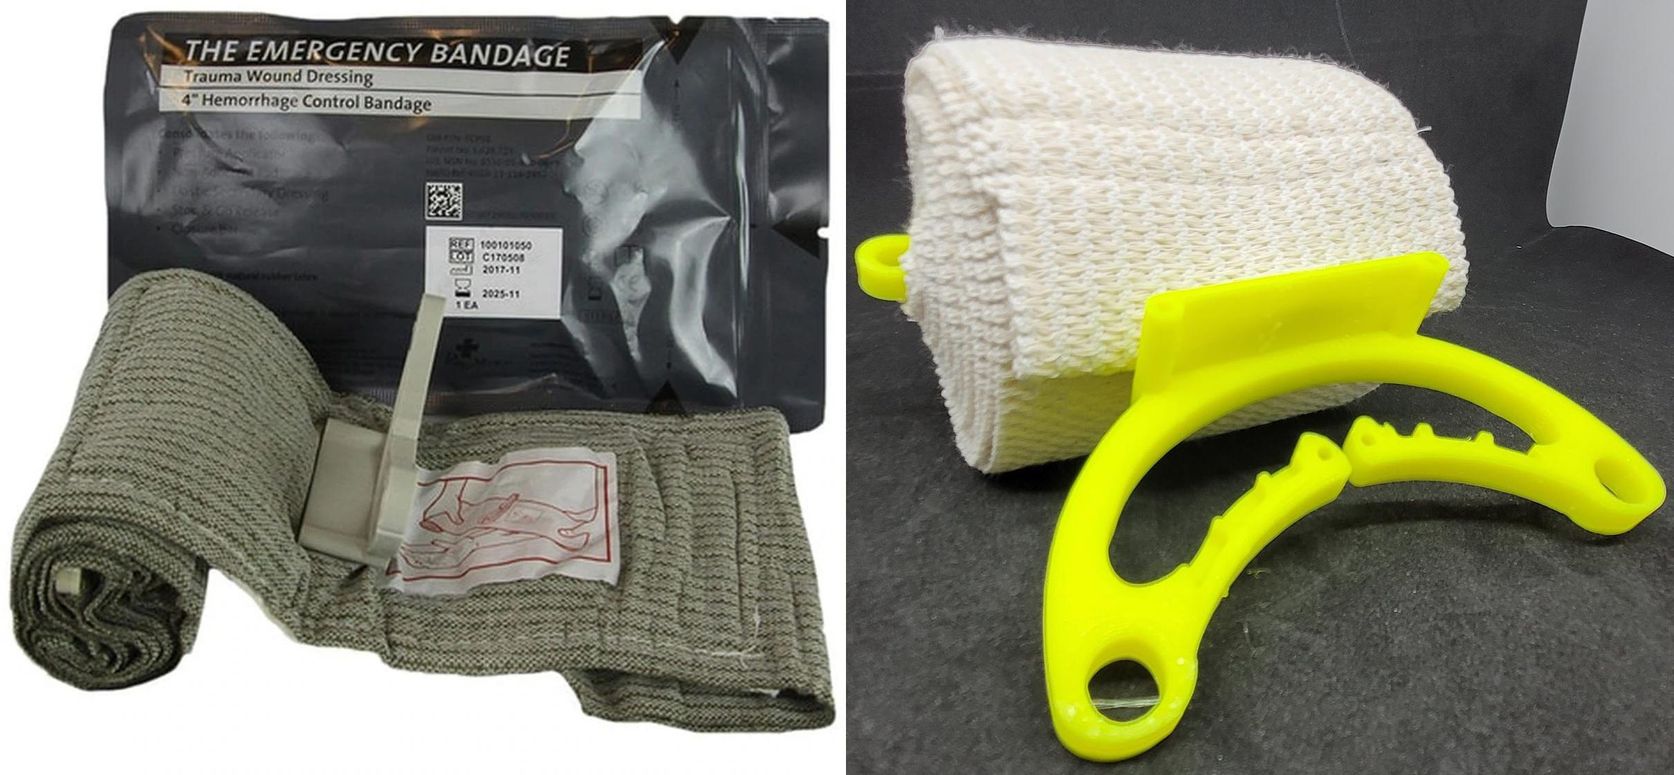 A product photo of a green bandage compared to a bright yellow printed bandage holder.